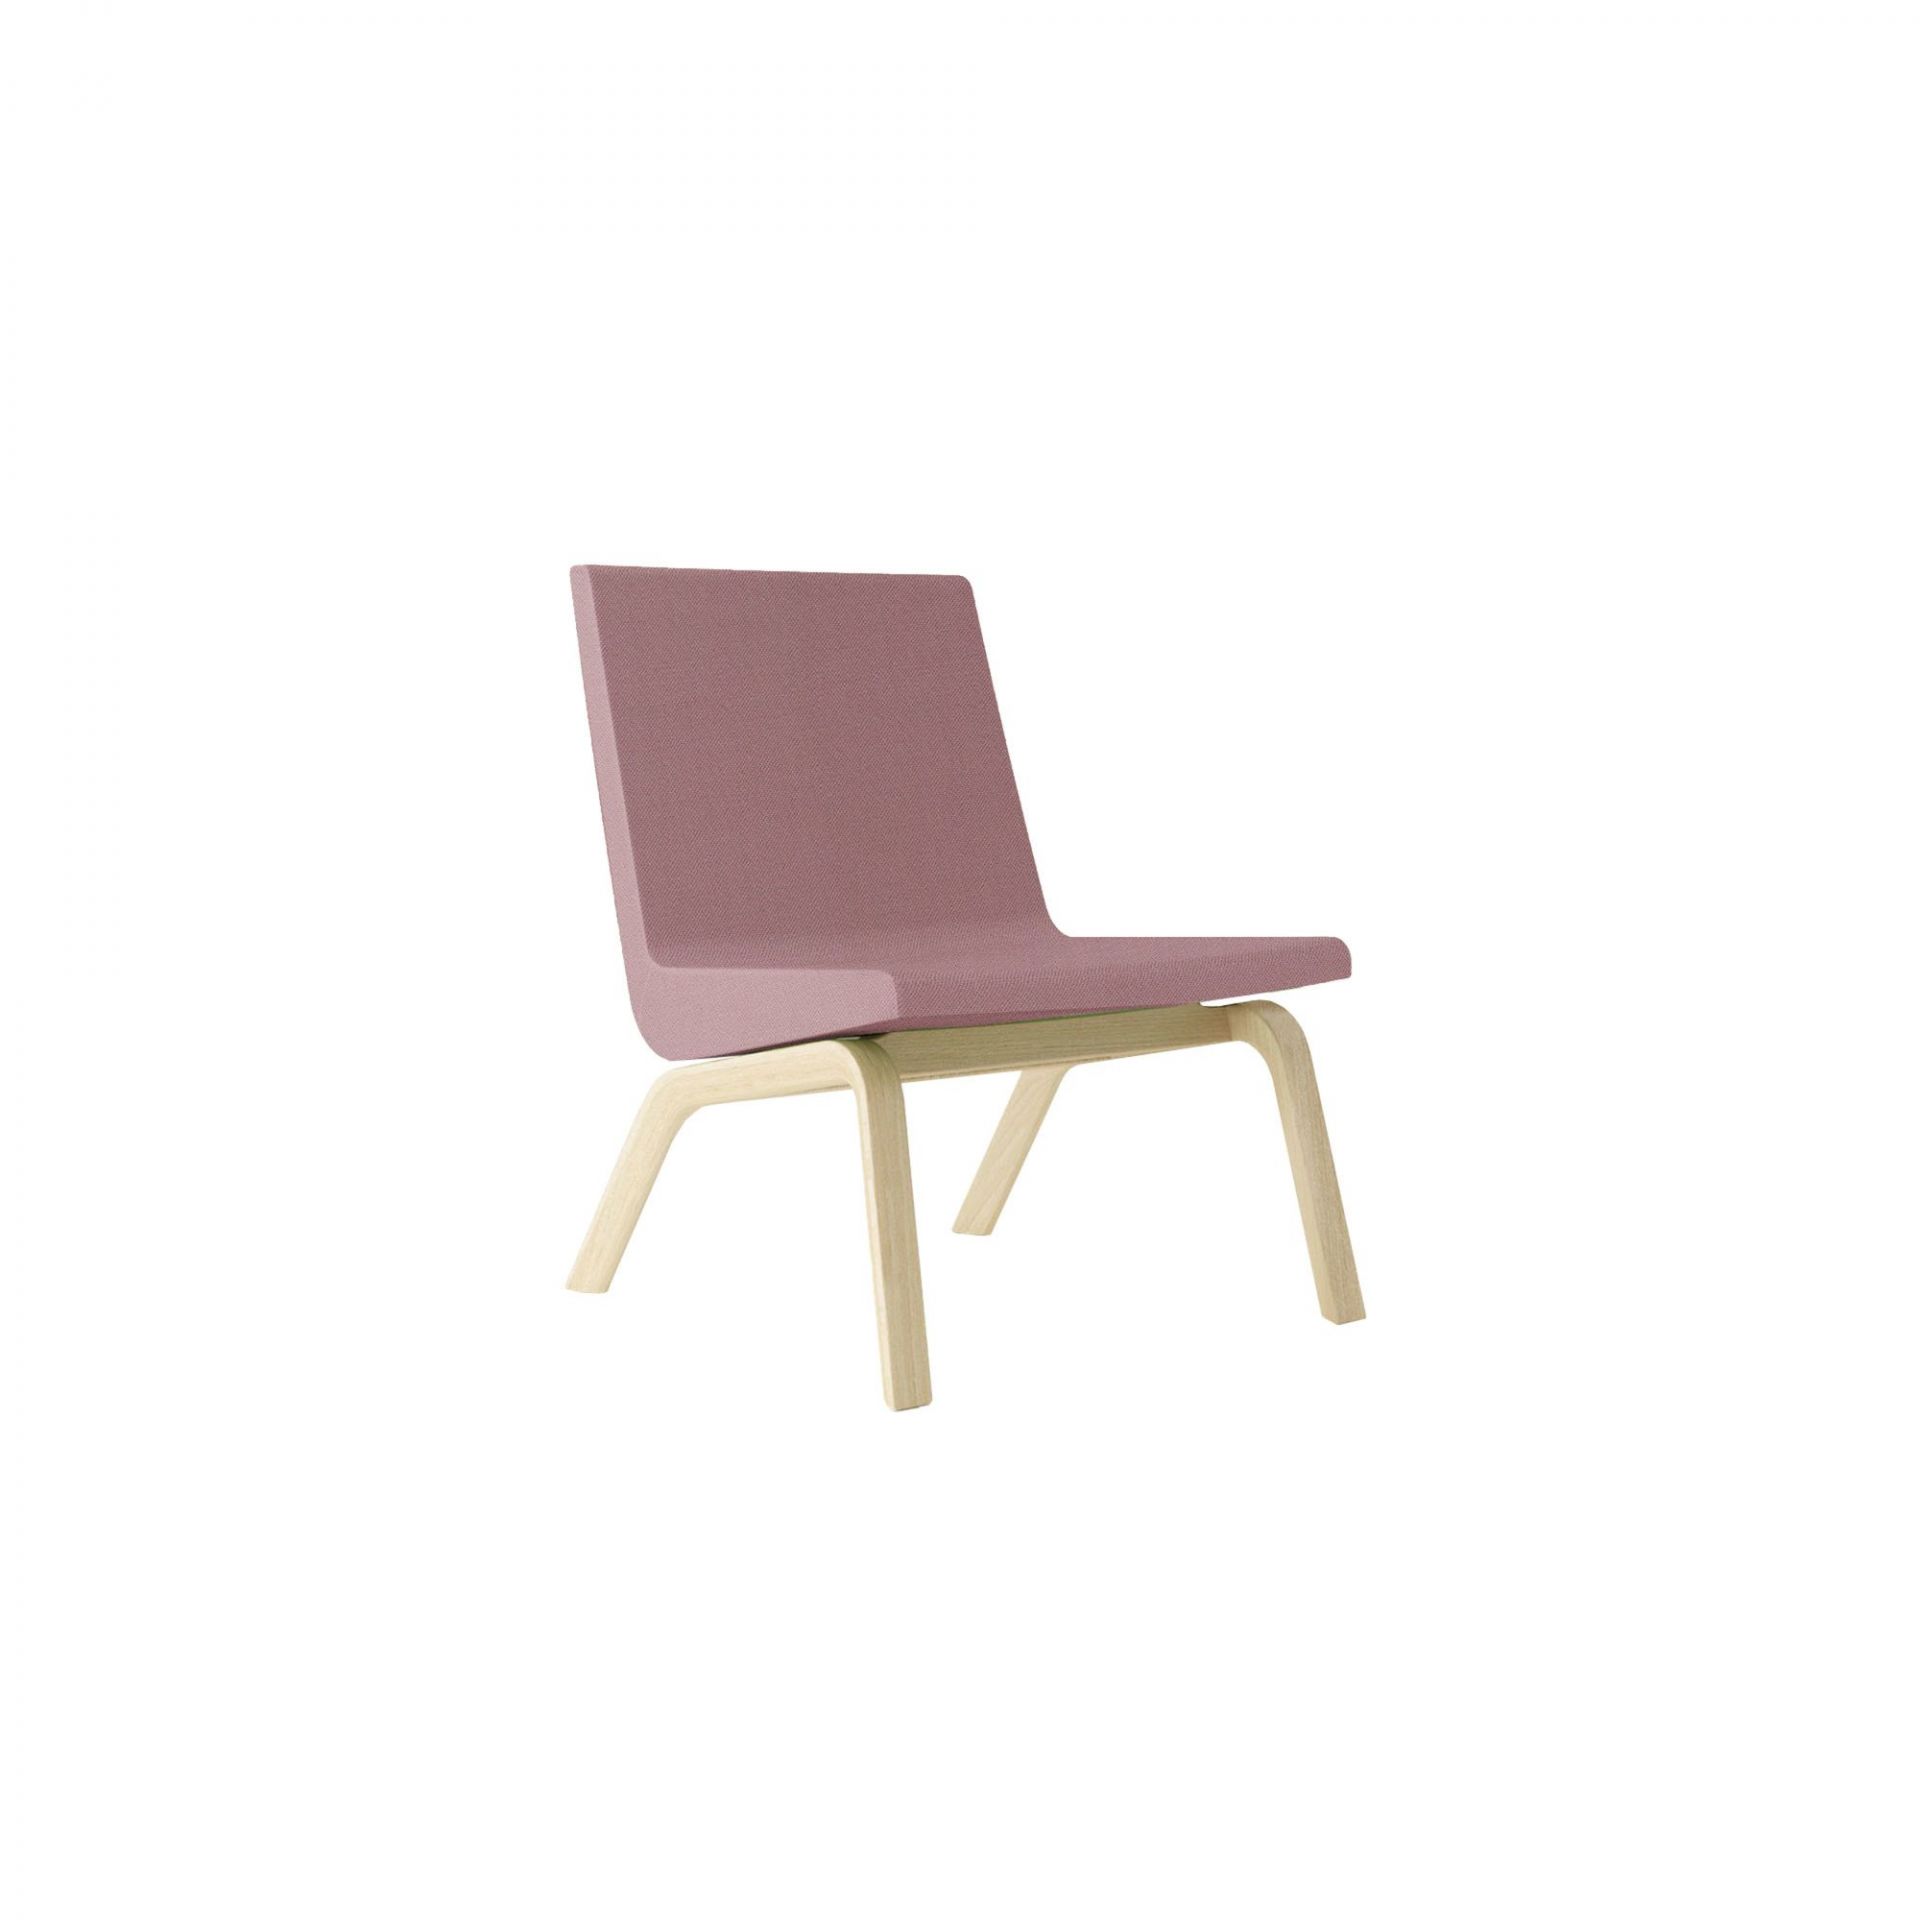 Woods Lounge chair with wooden legs